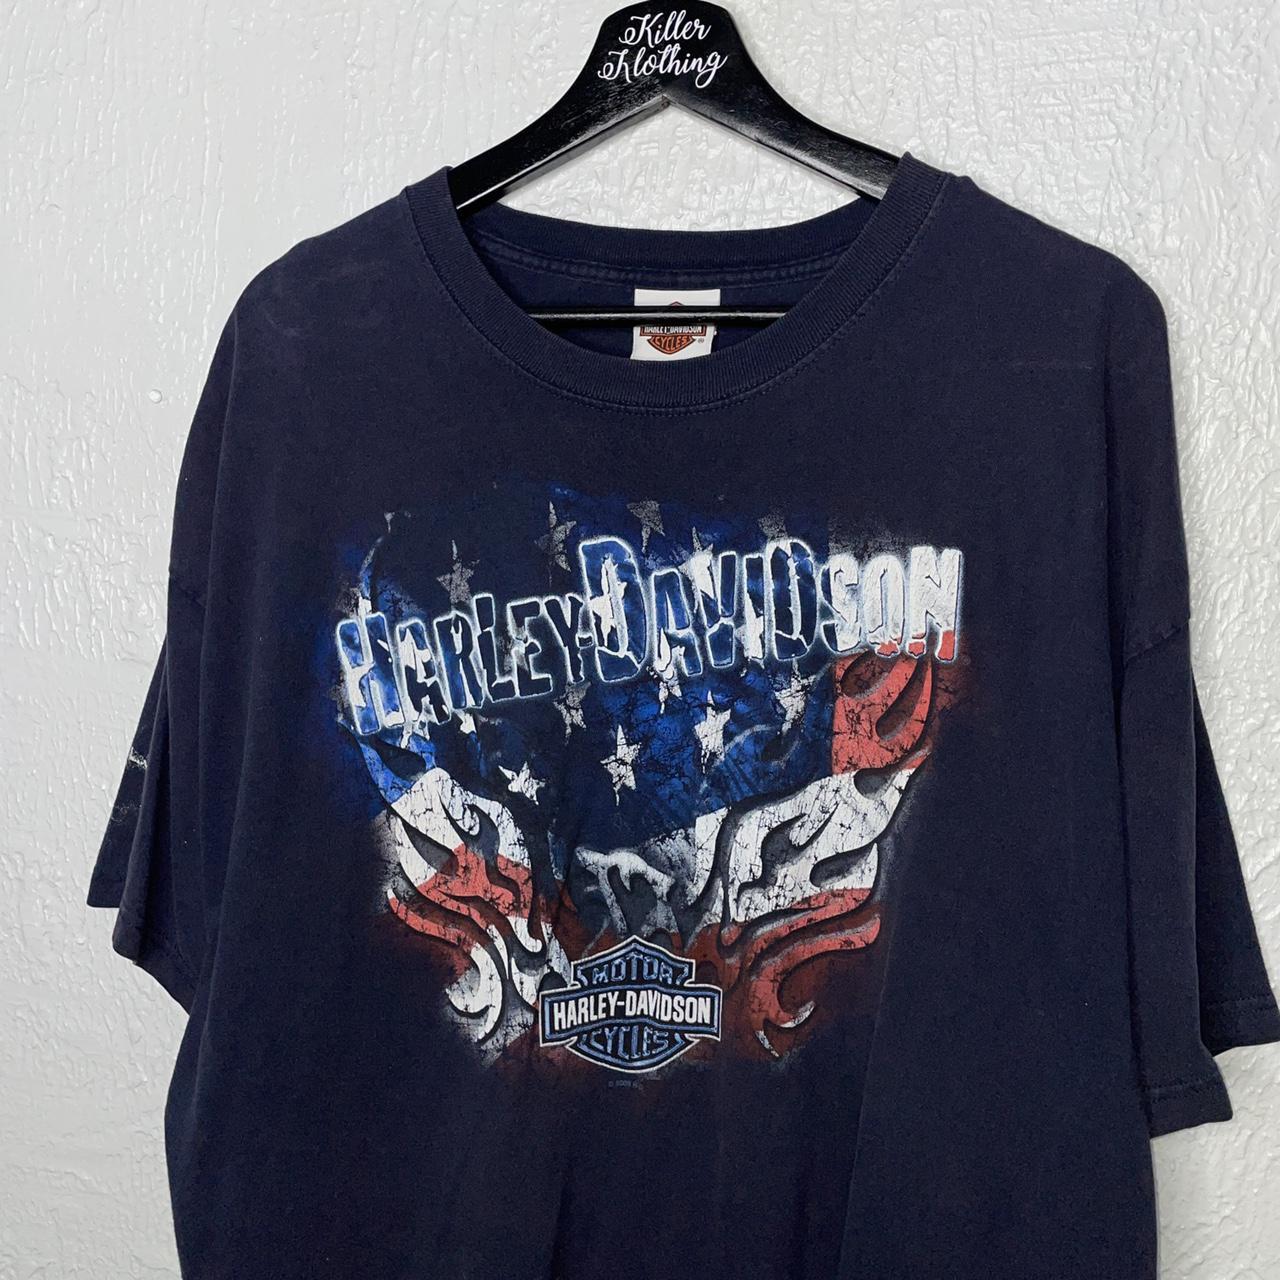 Harley Davidson Women's Navy and Red T-shirt (2)